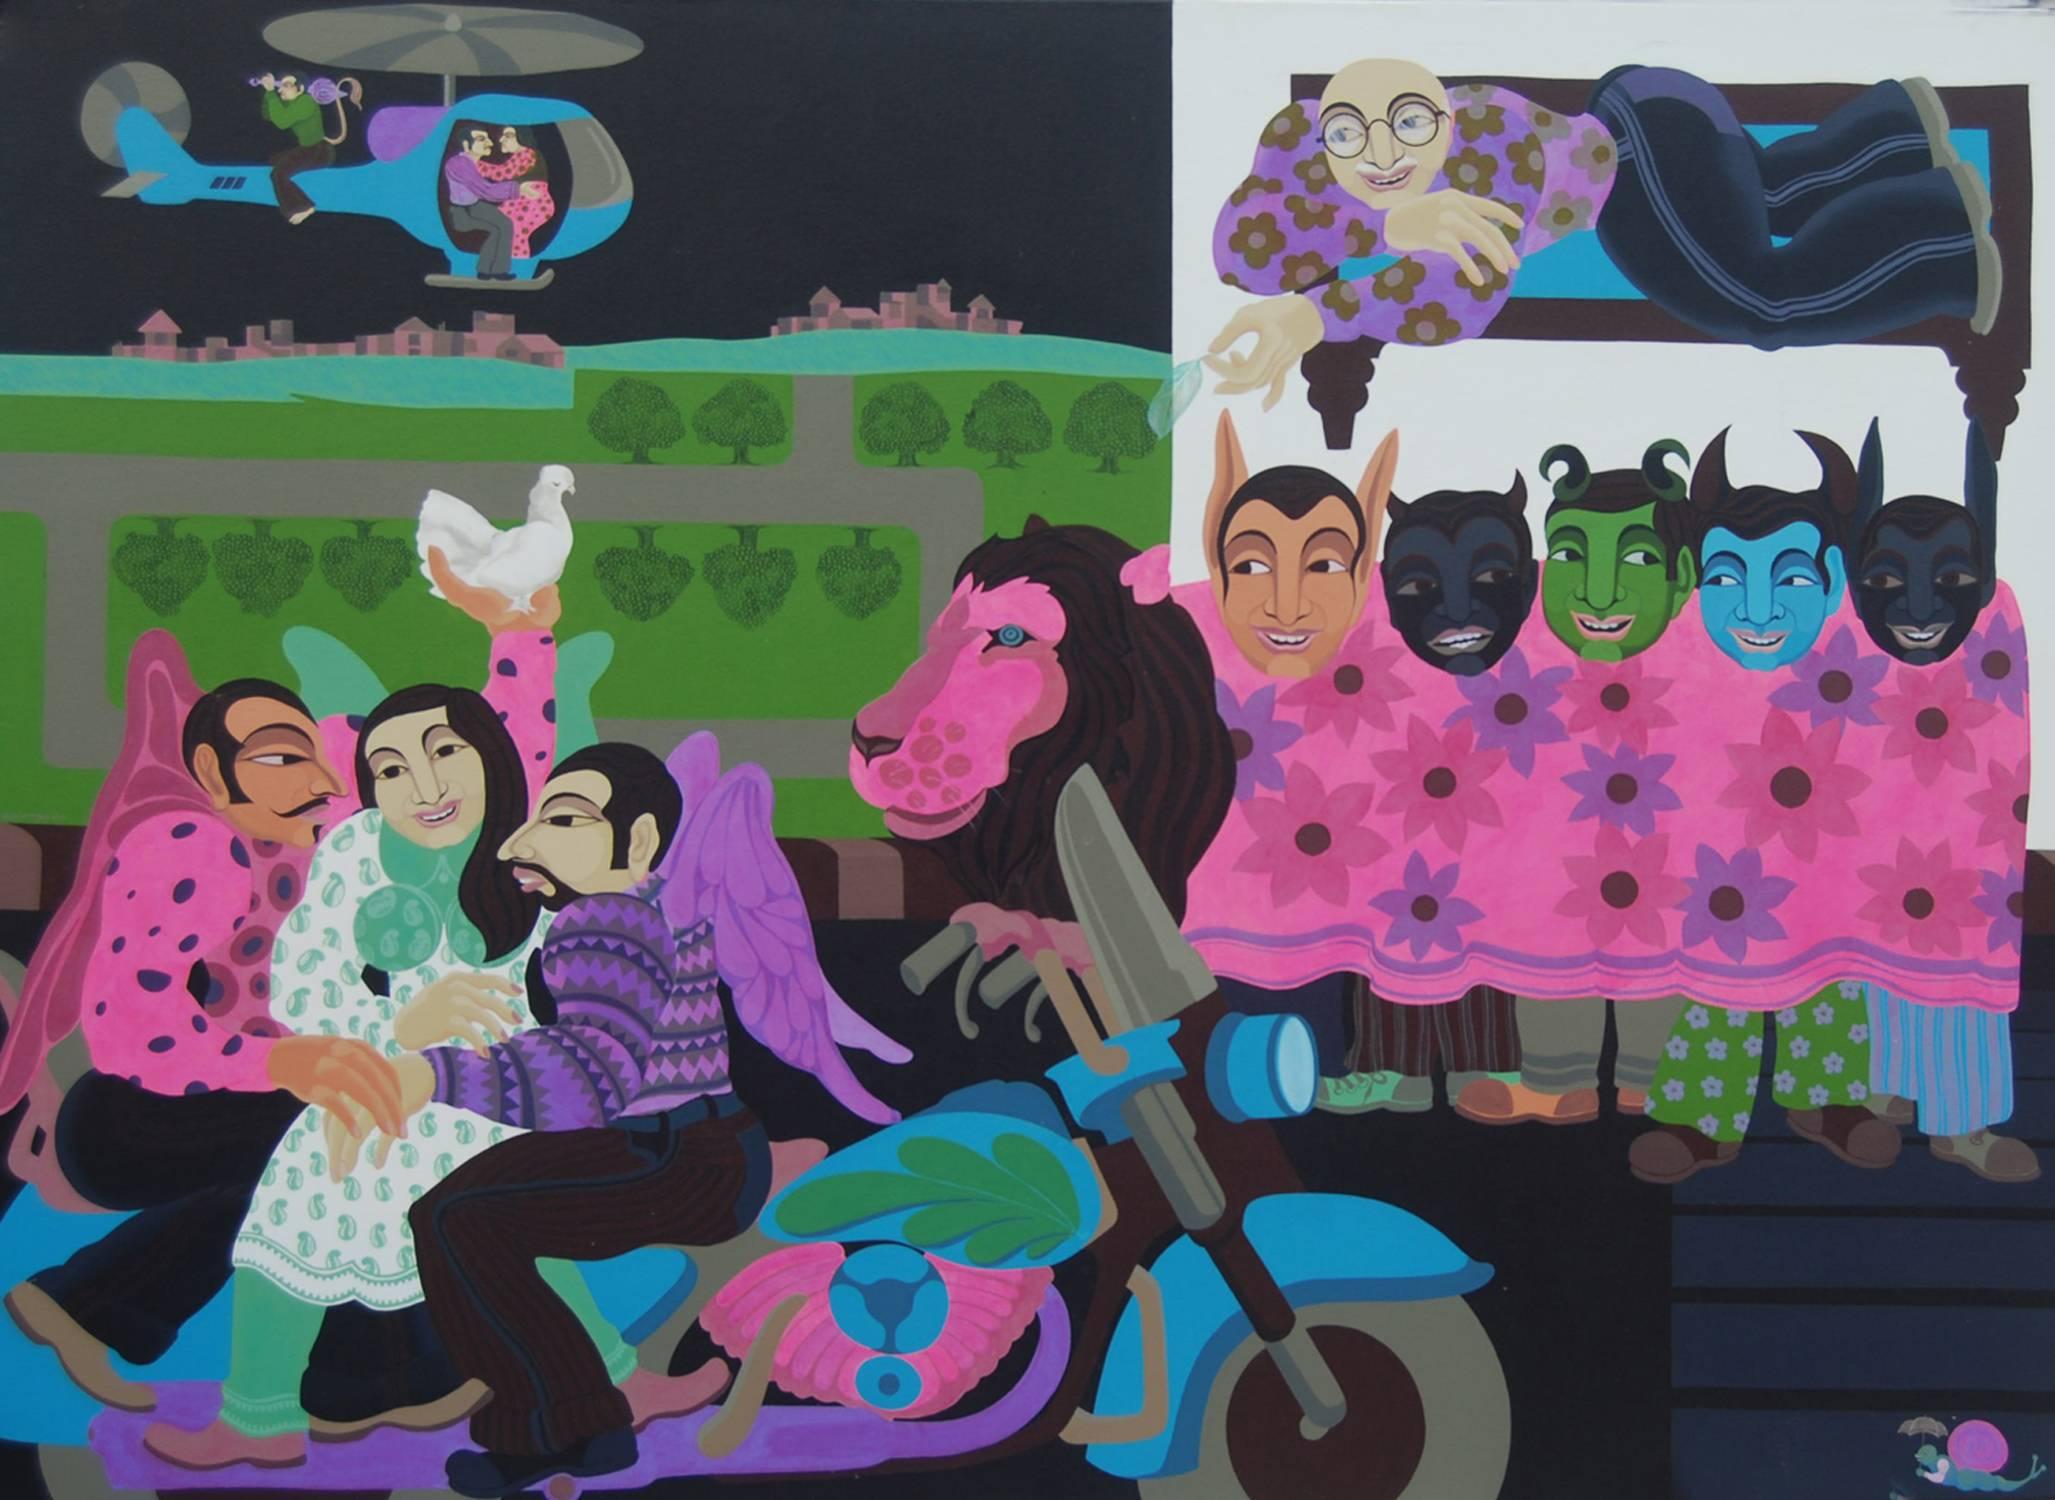 Pradiptaa Chakraborty Figurative Painting - The Voyeuristic Daddy, Acrylic, Green, Blue, Pink by Indian Artist "In Stock" 